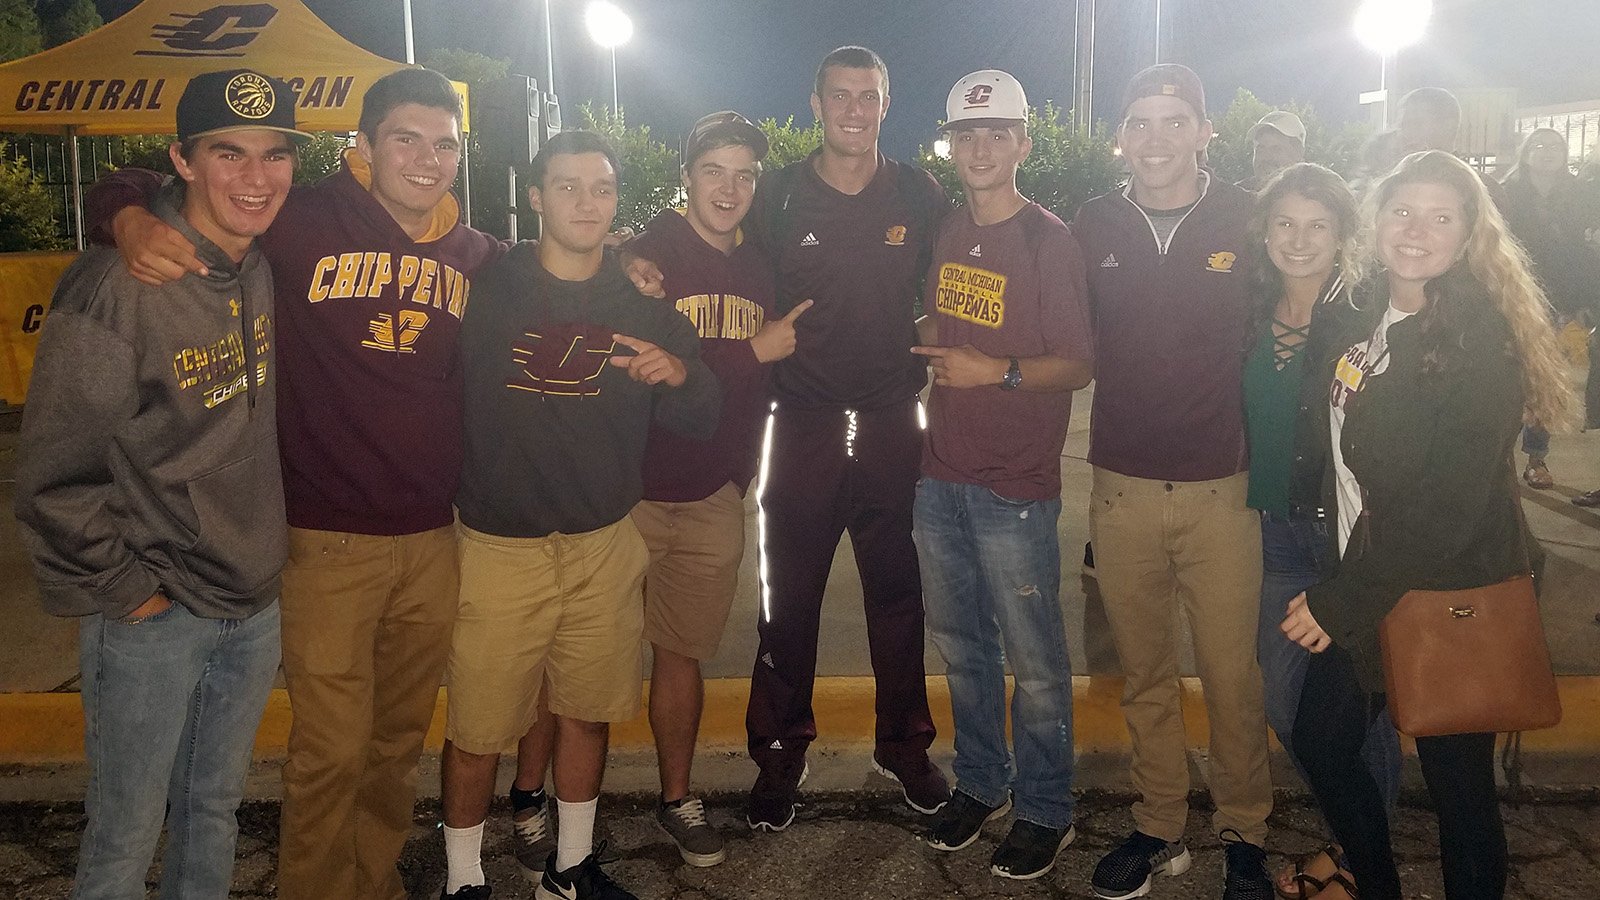 A group of eight CMU students wearing CMU gear pose with football player Jesse Kroll in the middle outside of a football stadium at night.